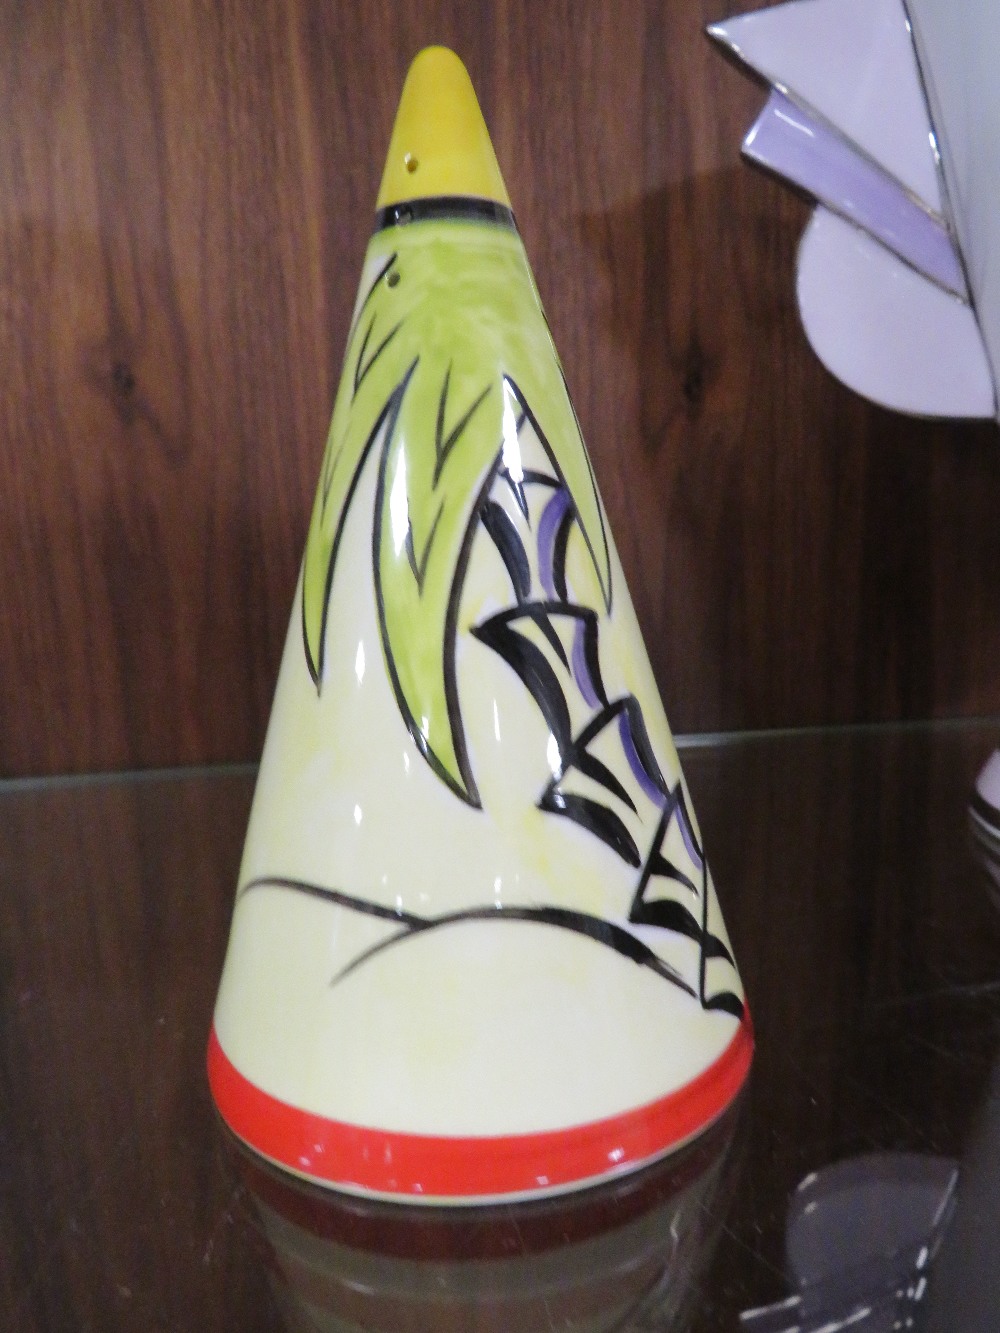 TWO BRIAN WOOD ART DECO VASES TOGETHER WITH A CONICAL SUGAR SHAKER - Image 3 of 5